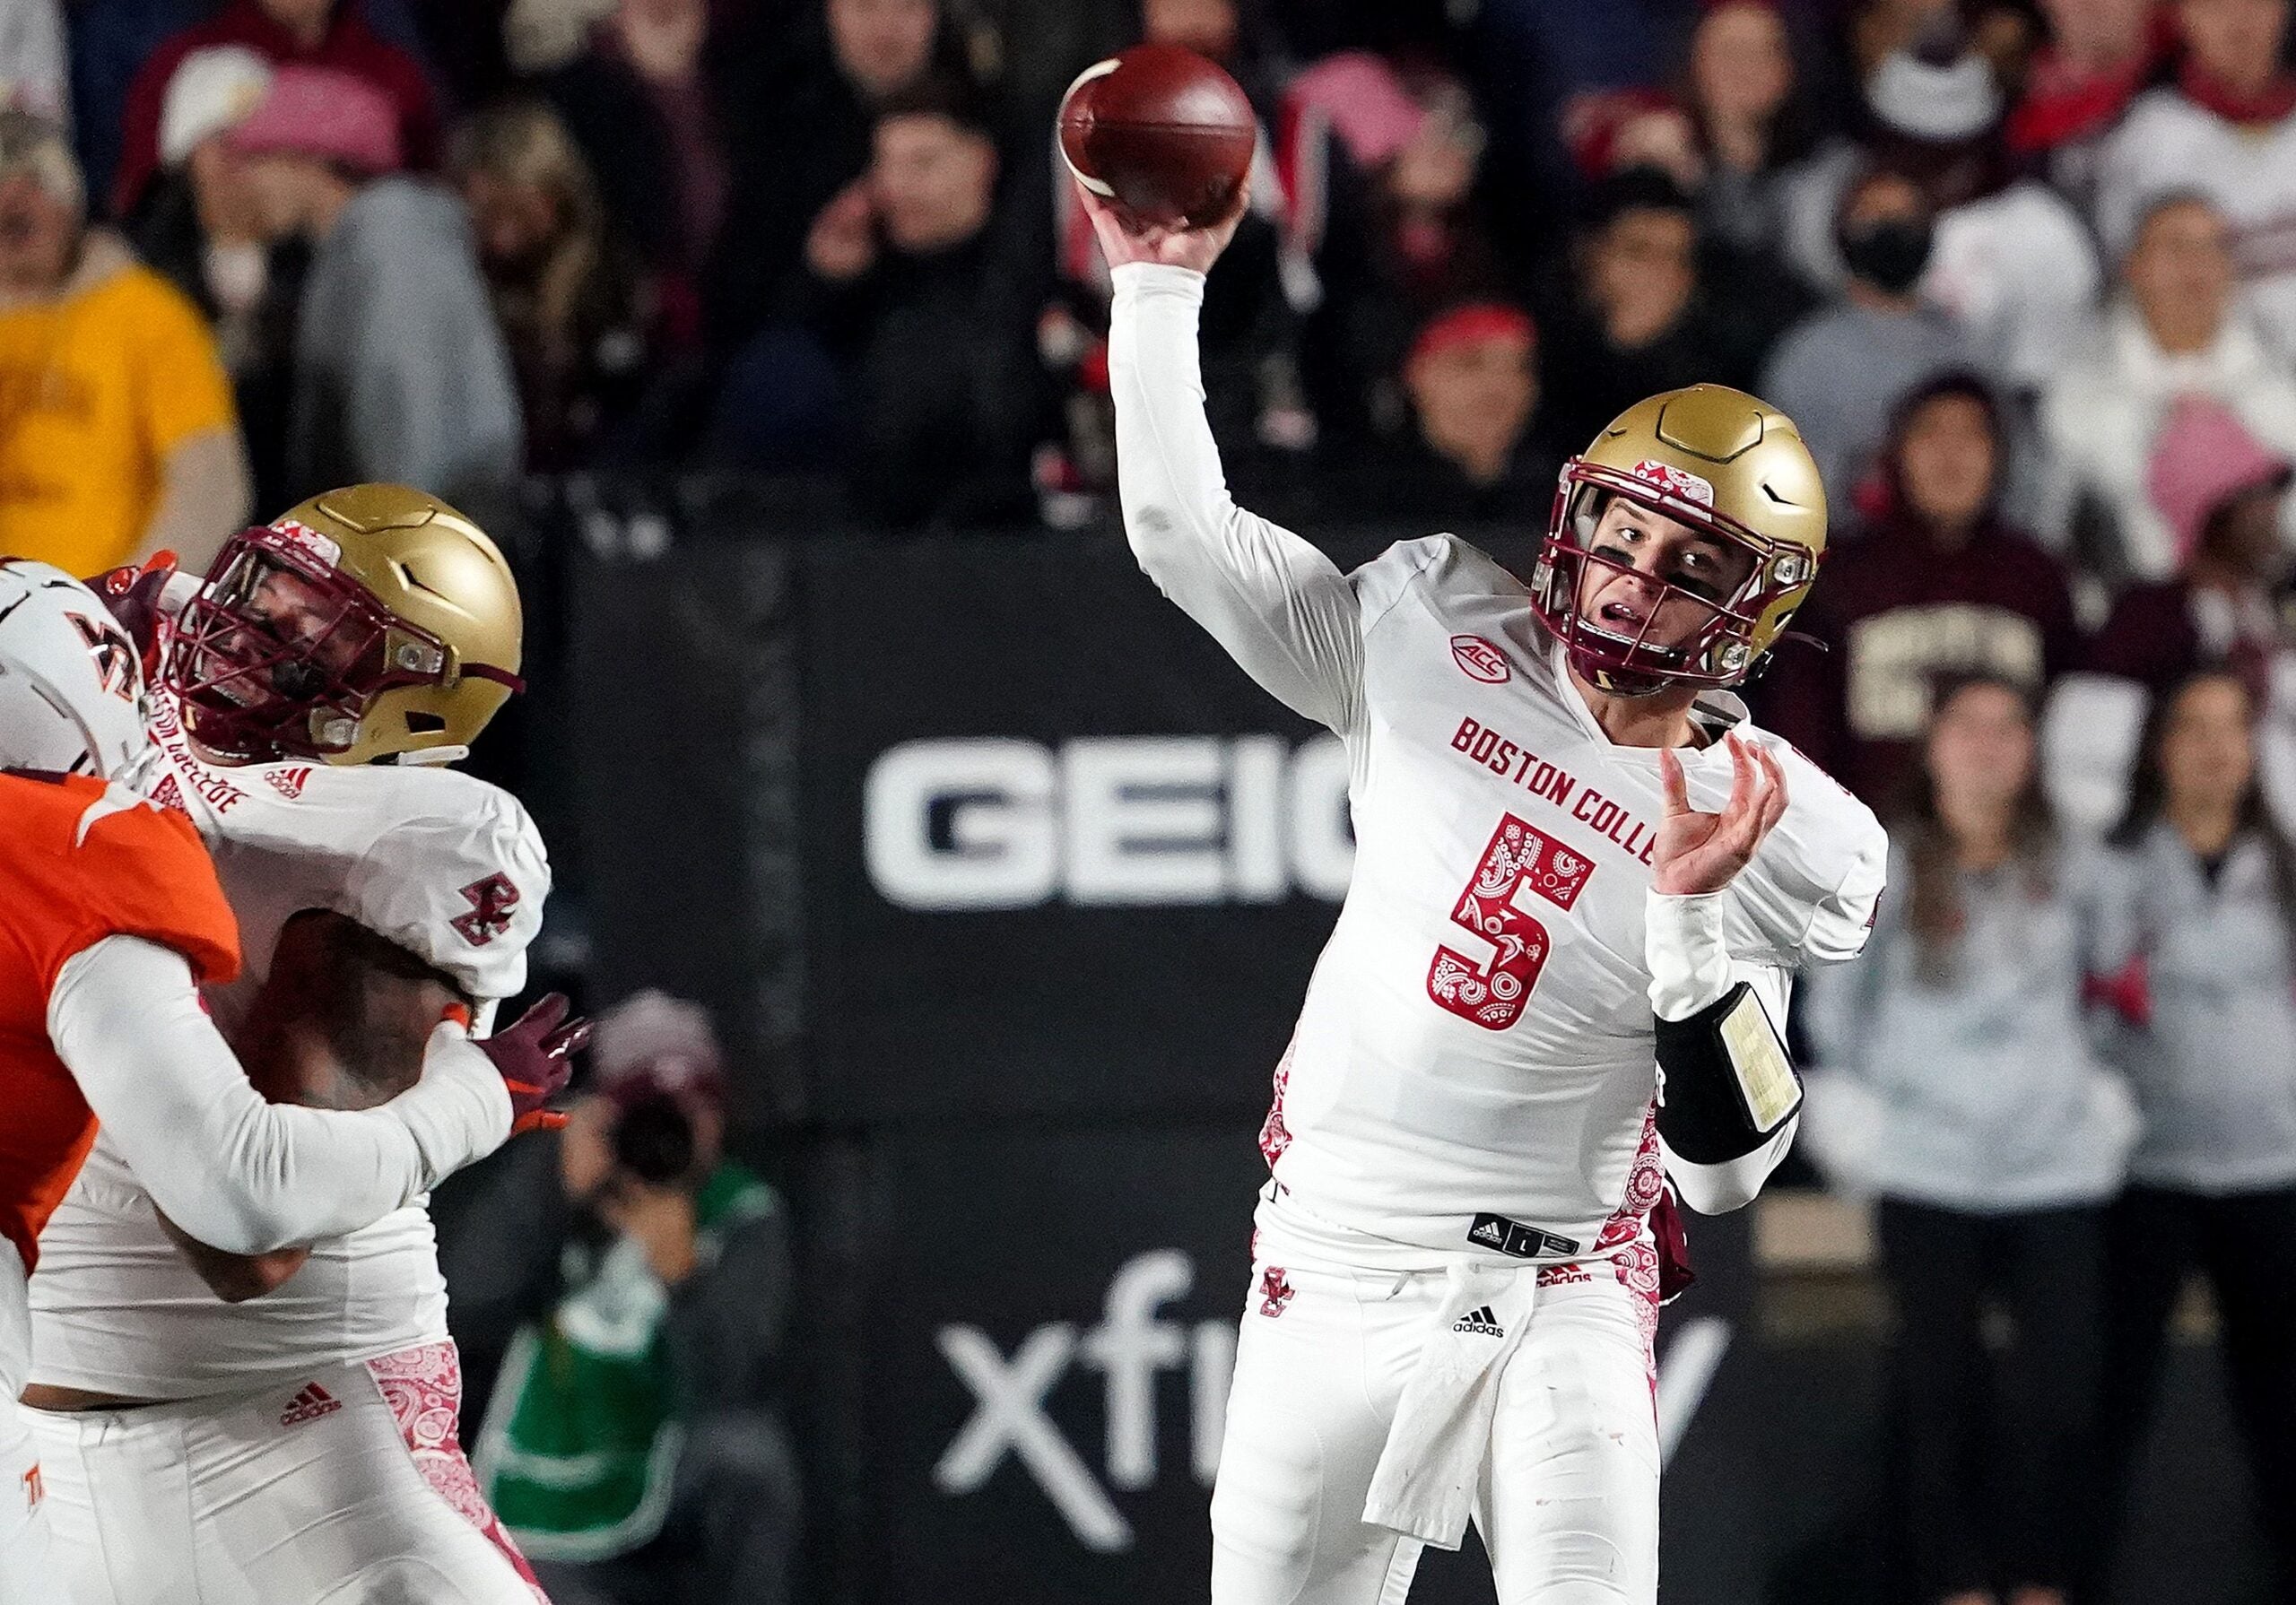 Back to normal not good enough for Boston College, Hafley